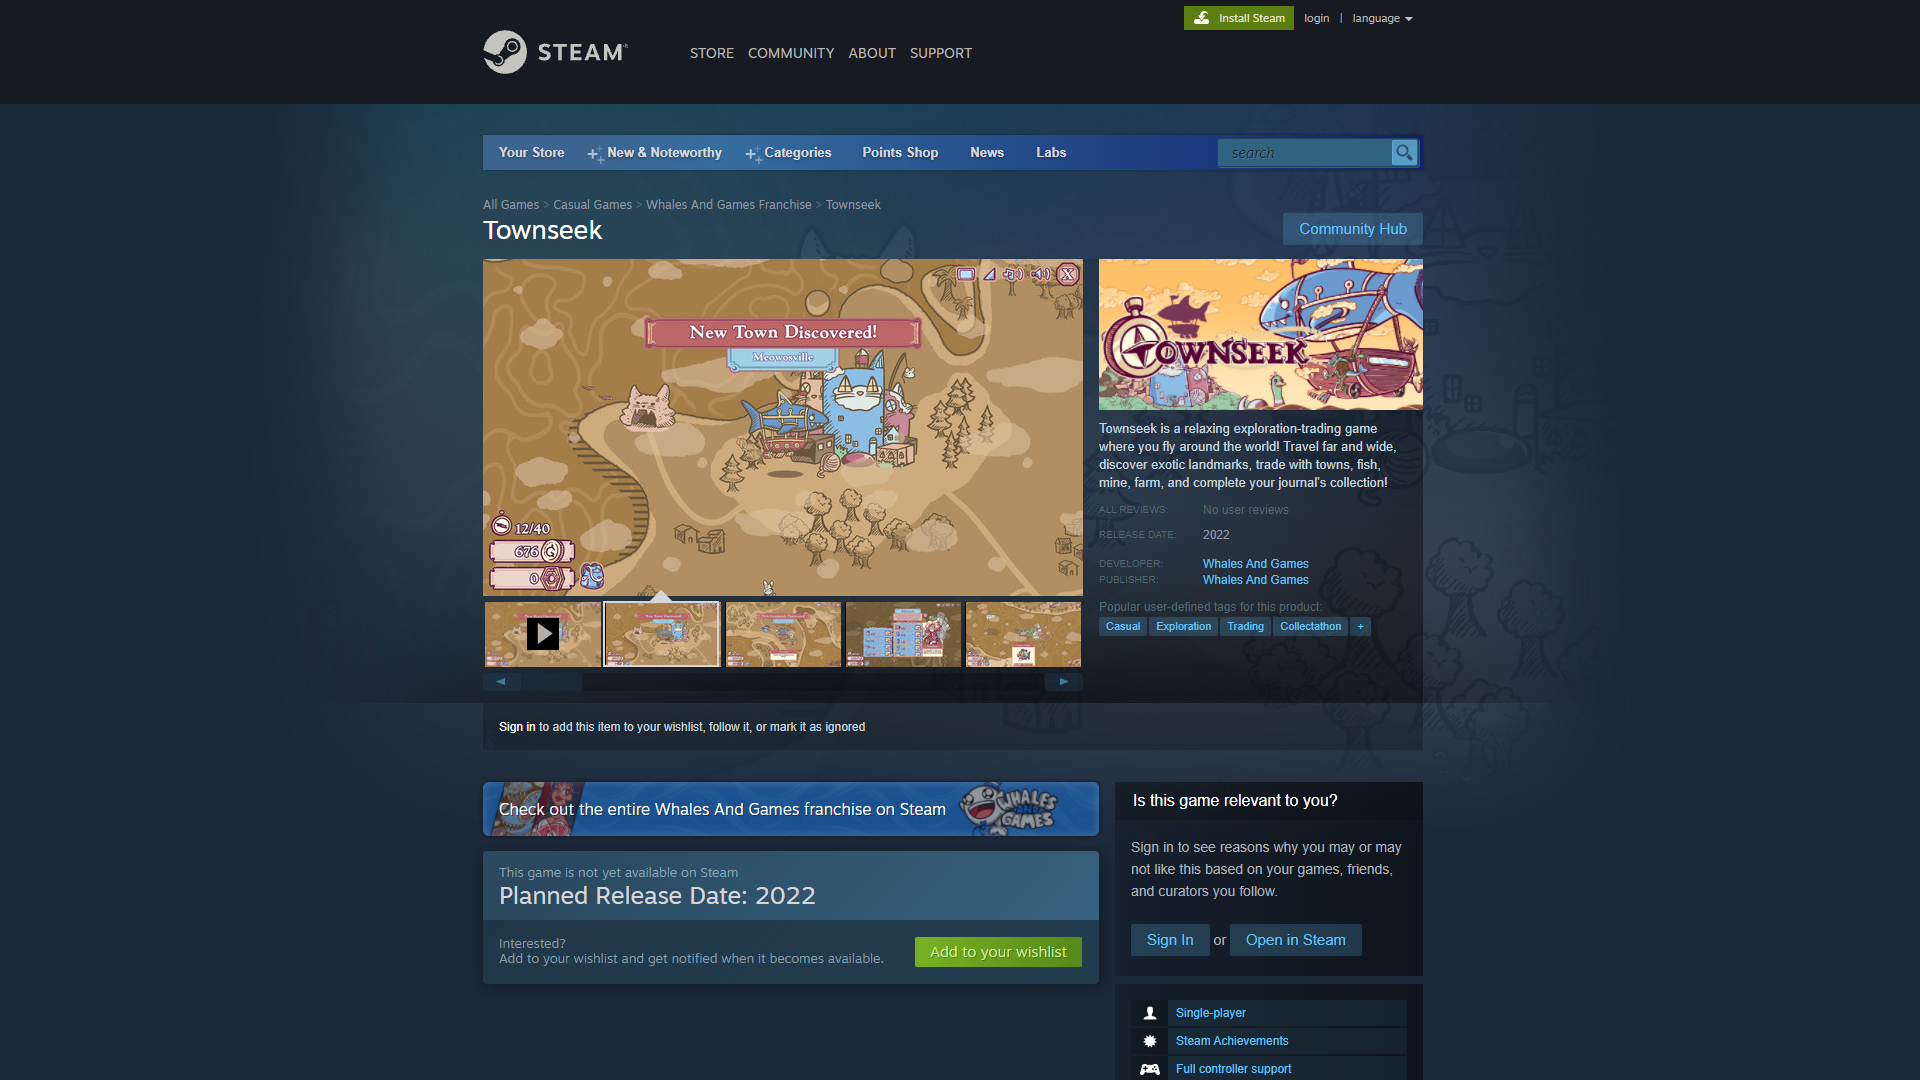 The steam page for Townseek